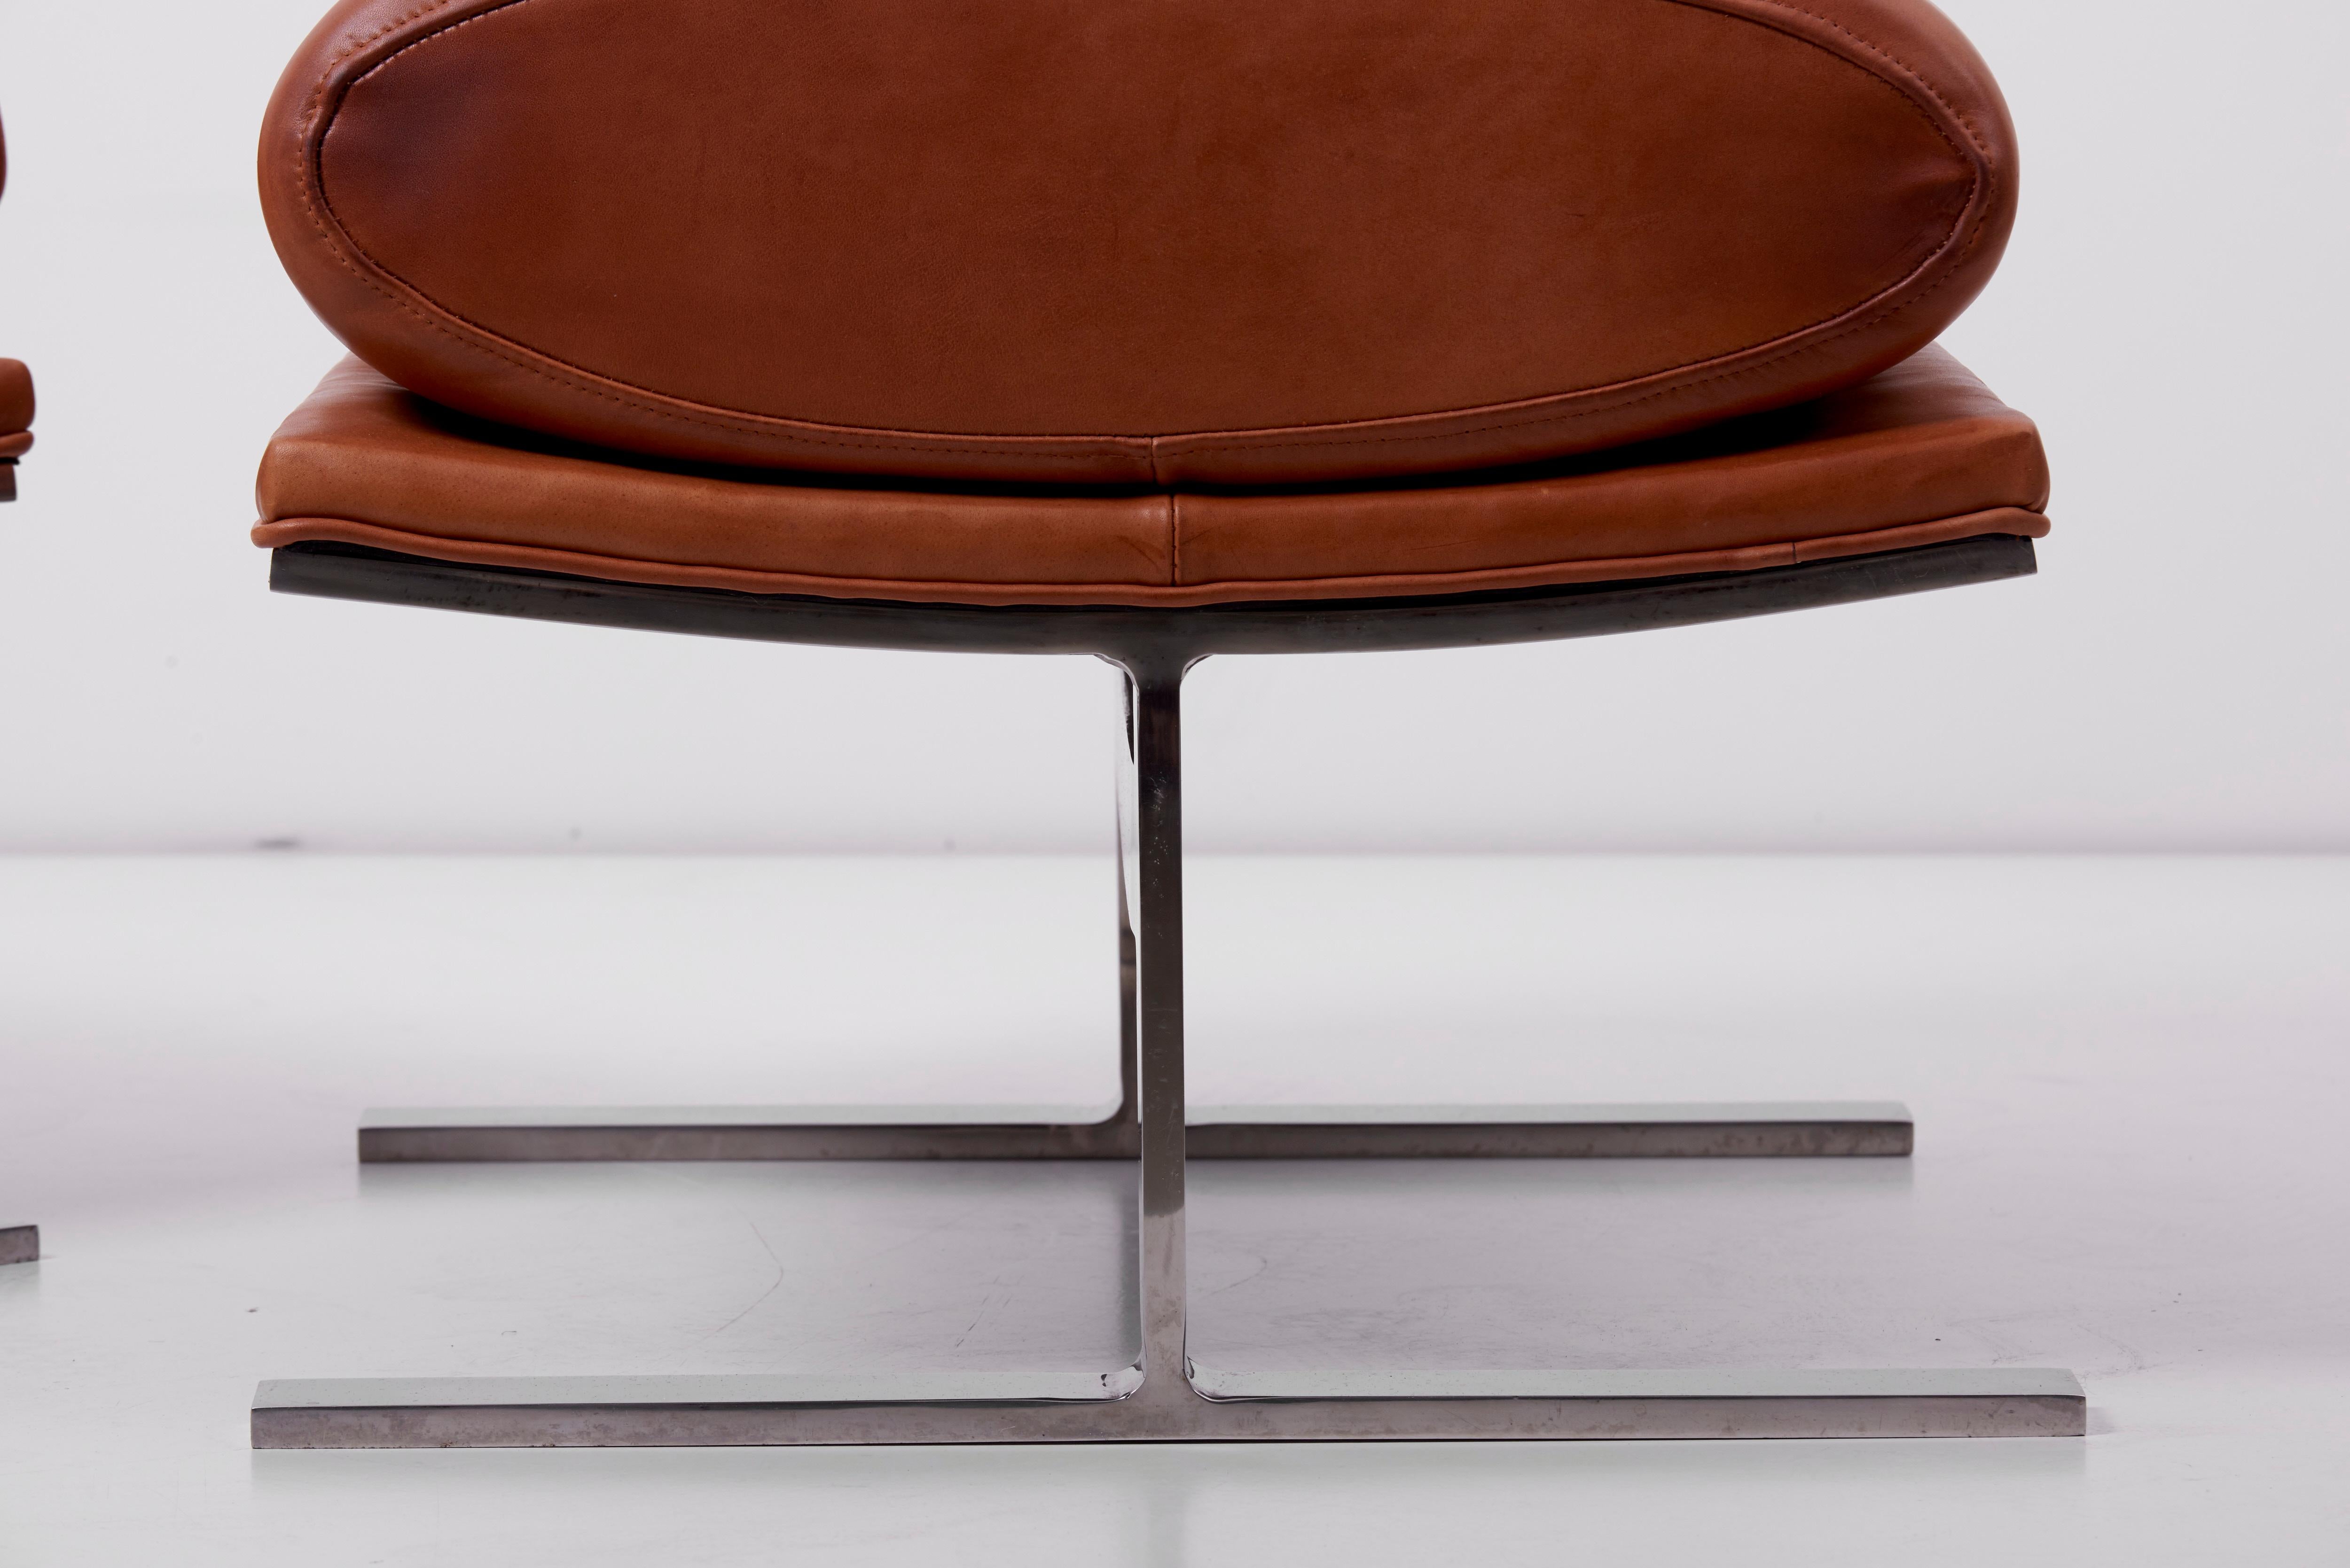 20th Century Pair of Arc Stools 'can also be used as a Bench' by Kipp Stewart for Directional